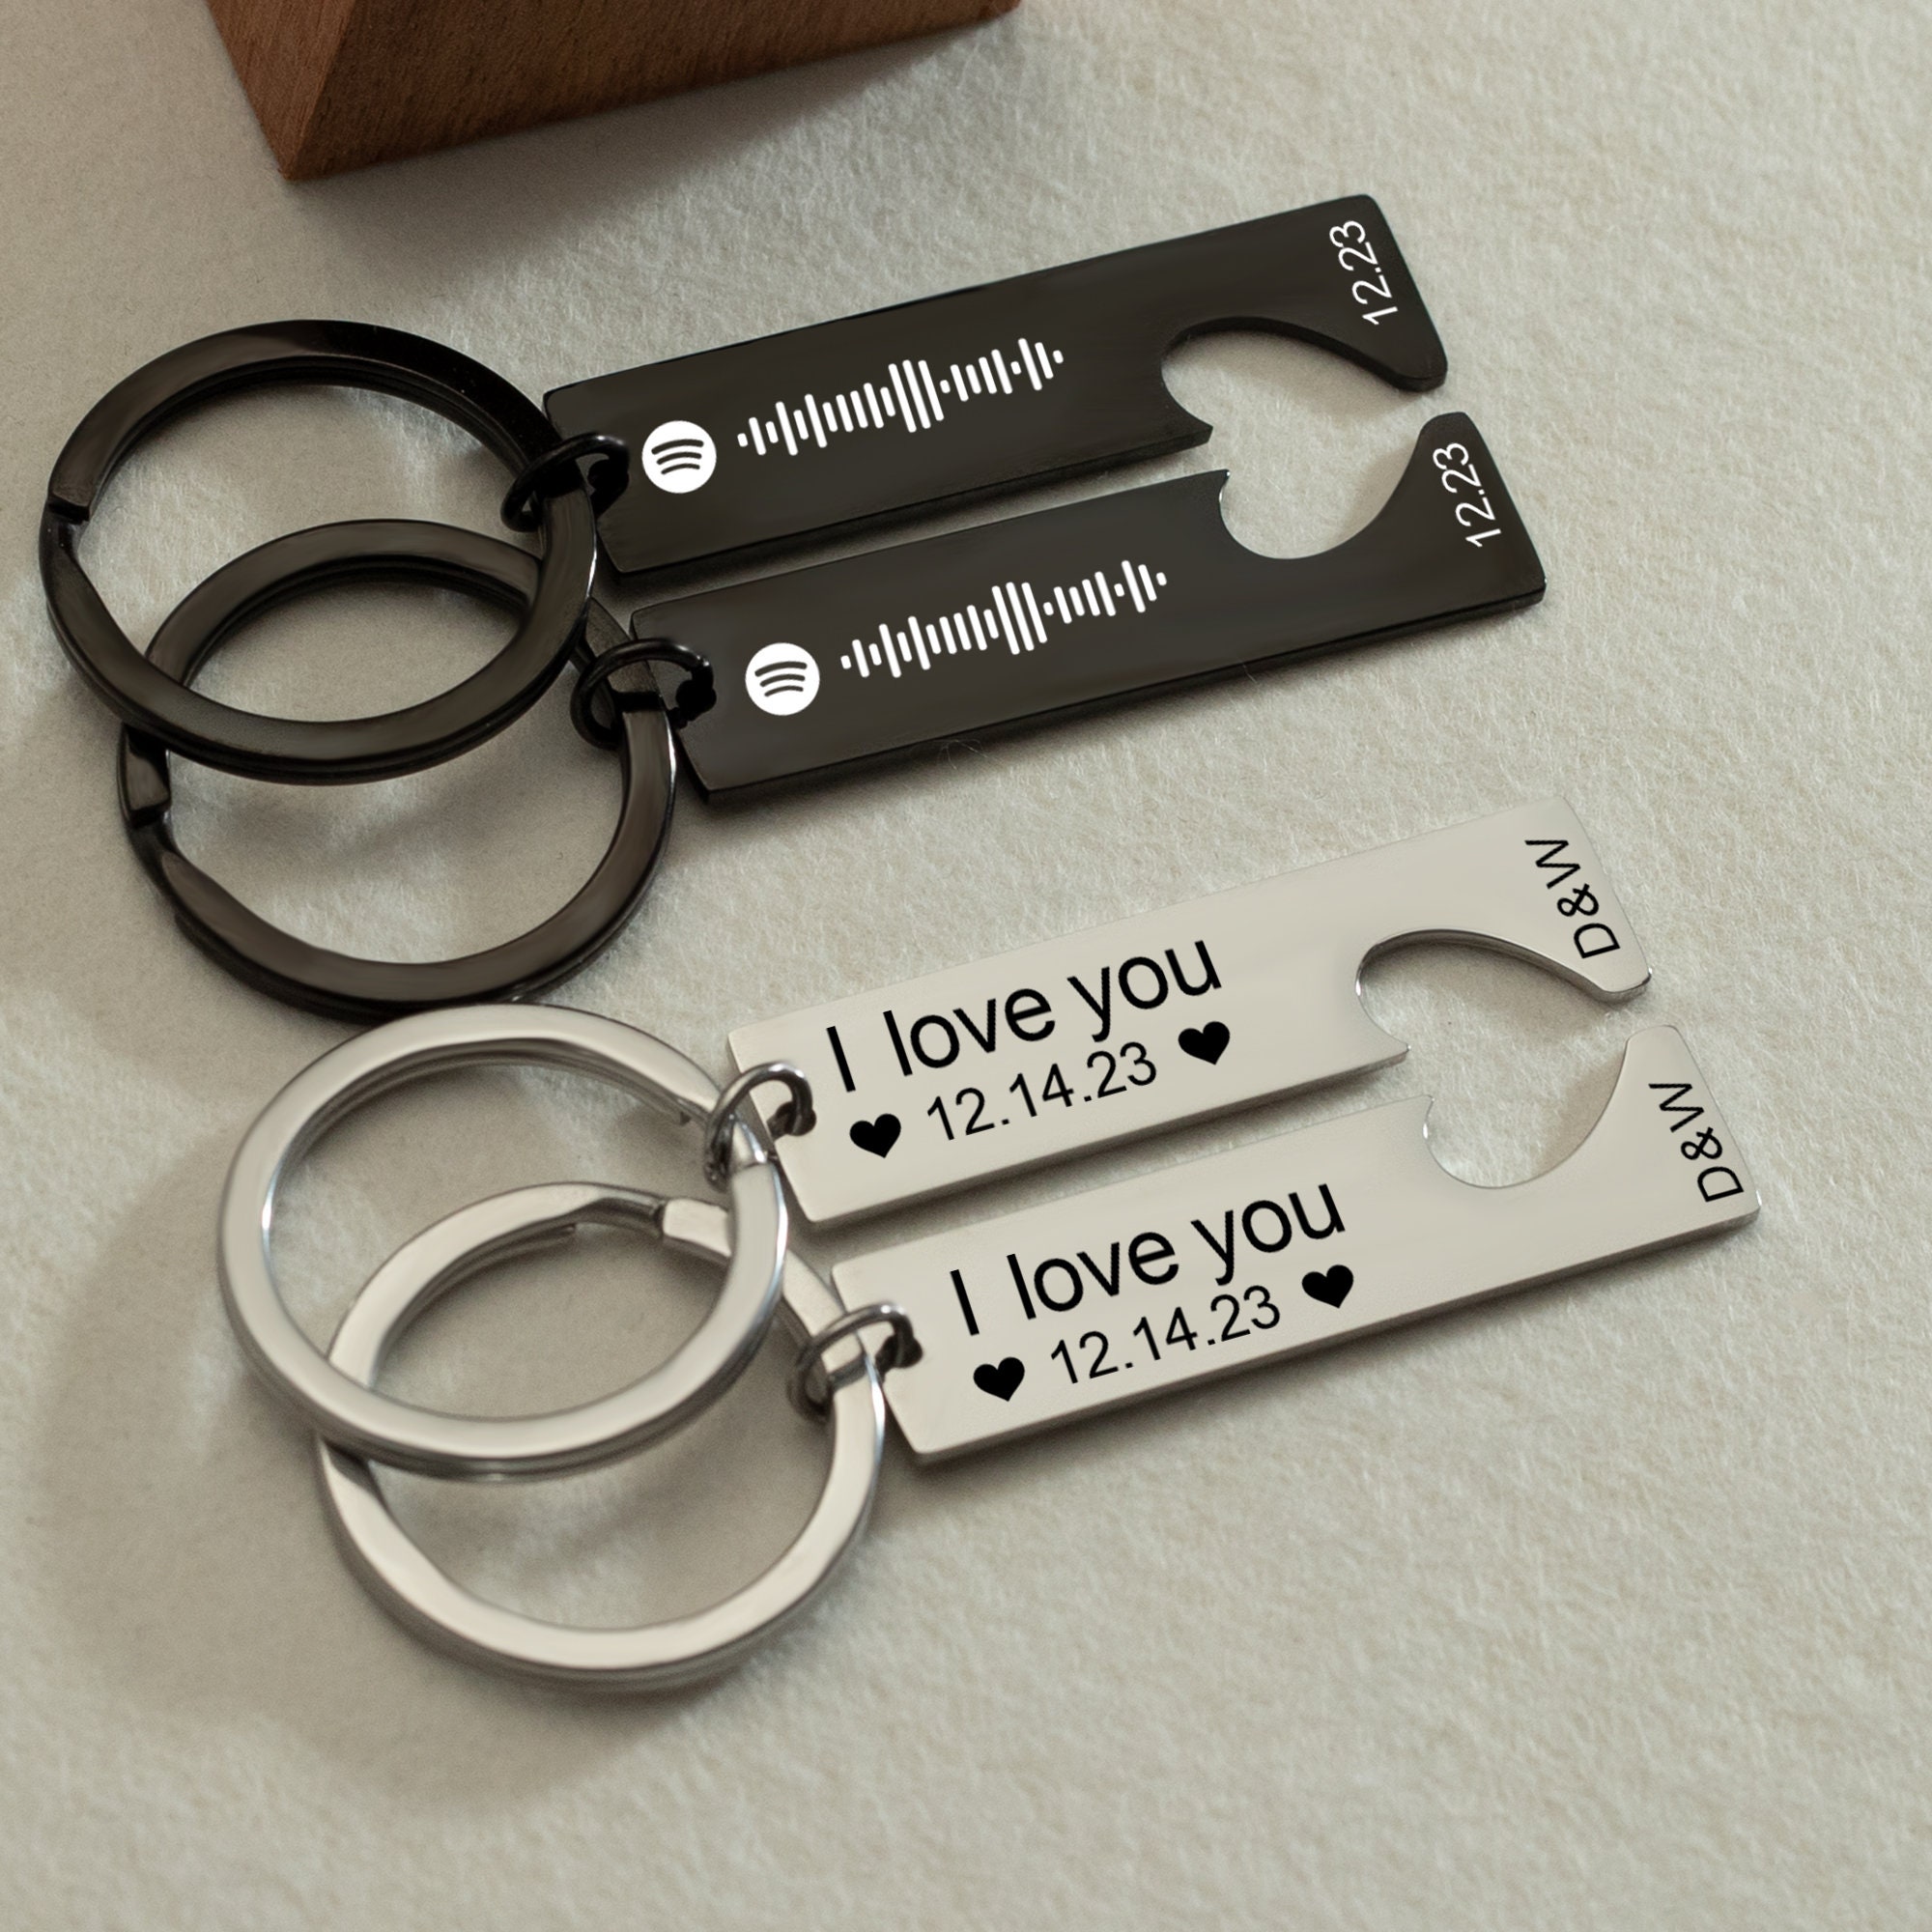  Gifts for Boyfriend Girlfriend Anniversary Gift Bookmark for  Her Him Couple Husband Wife Birthday Valentine Day Gifts Wedding Gifts for  One 11 Year Anniversary Gifts from Wifey Hubby for Boyfriend 